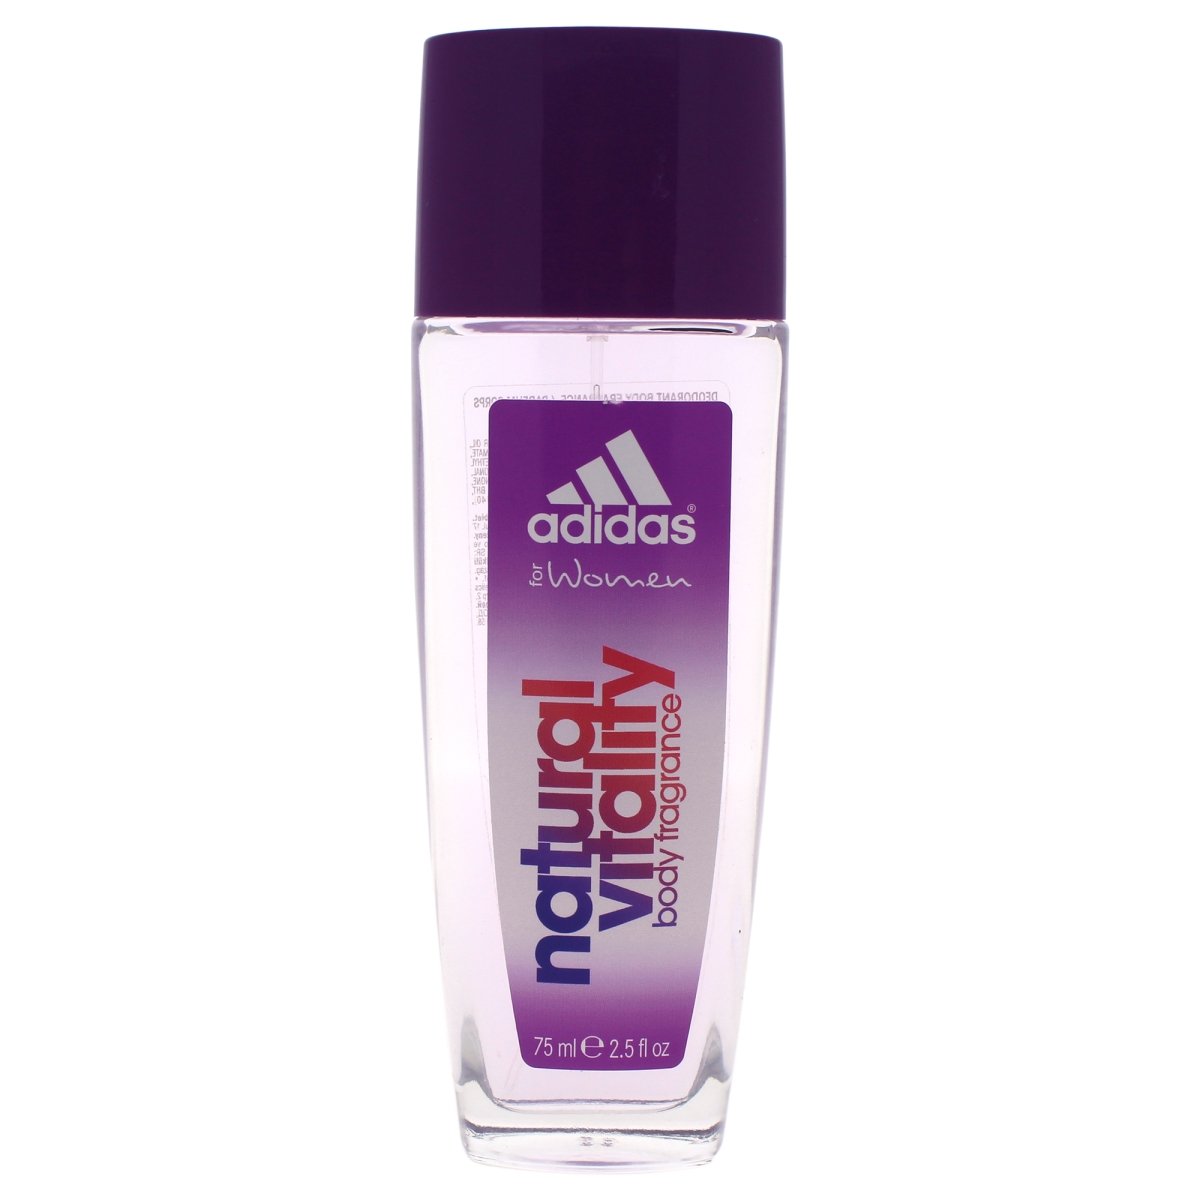 EAN 3661163406534 product image for Adidas W-8870 2.5 oz Adidas Natural Vitality Body Fragrance Spray for Women | upcitemdb.com